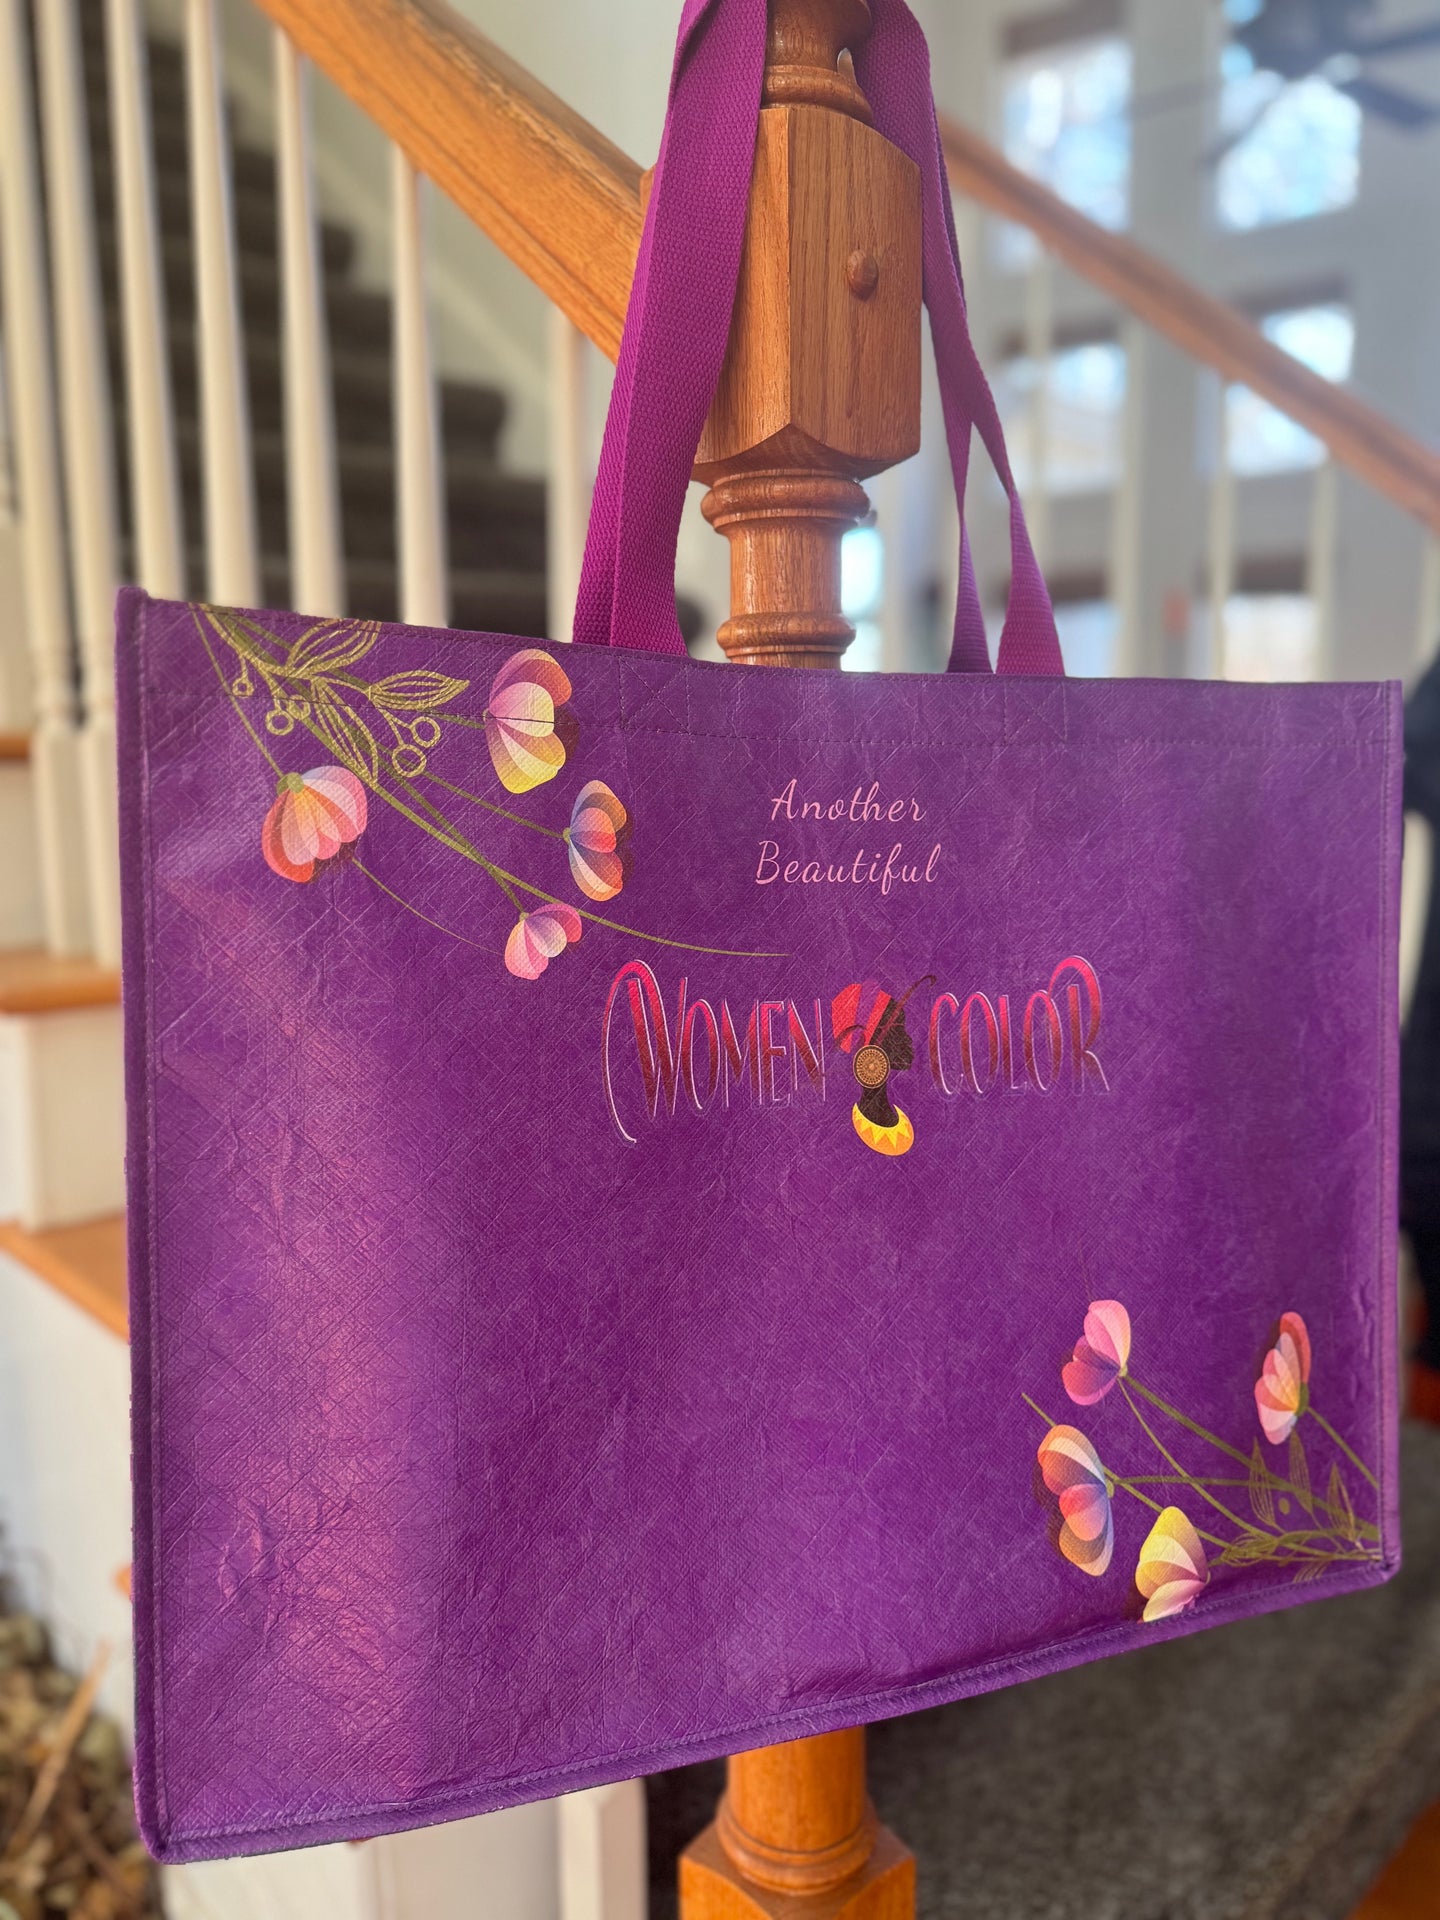 The New Women of Color Purple Tote Bag x 12